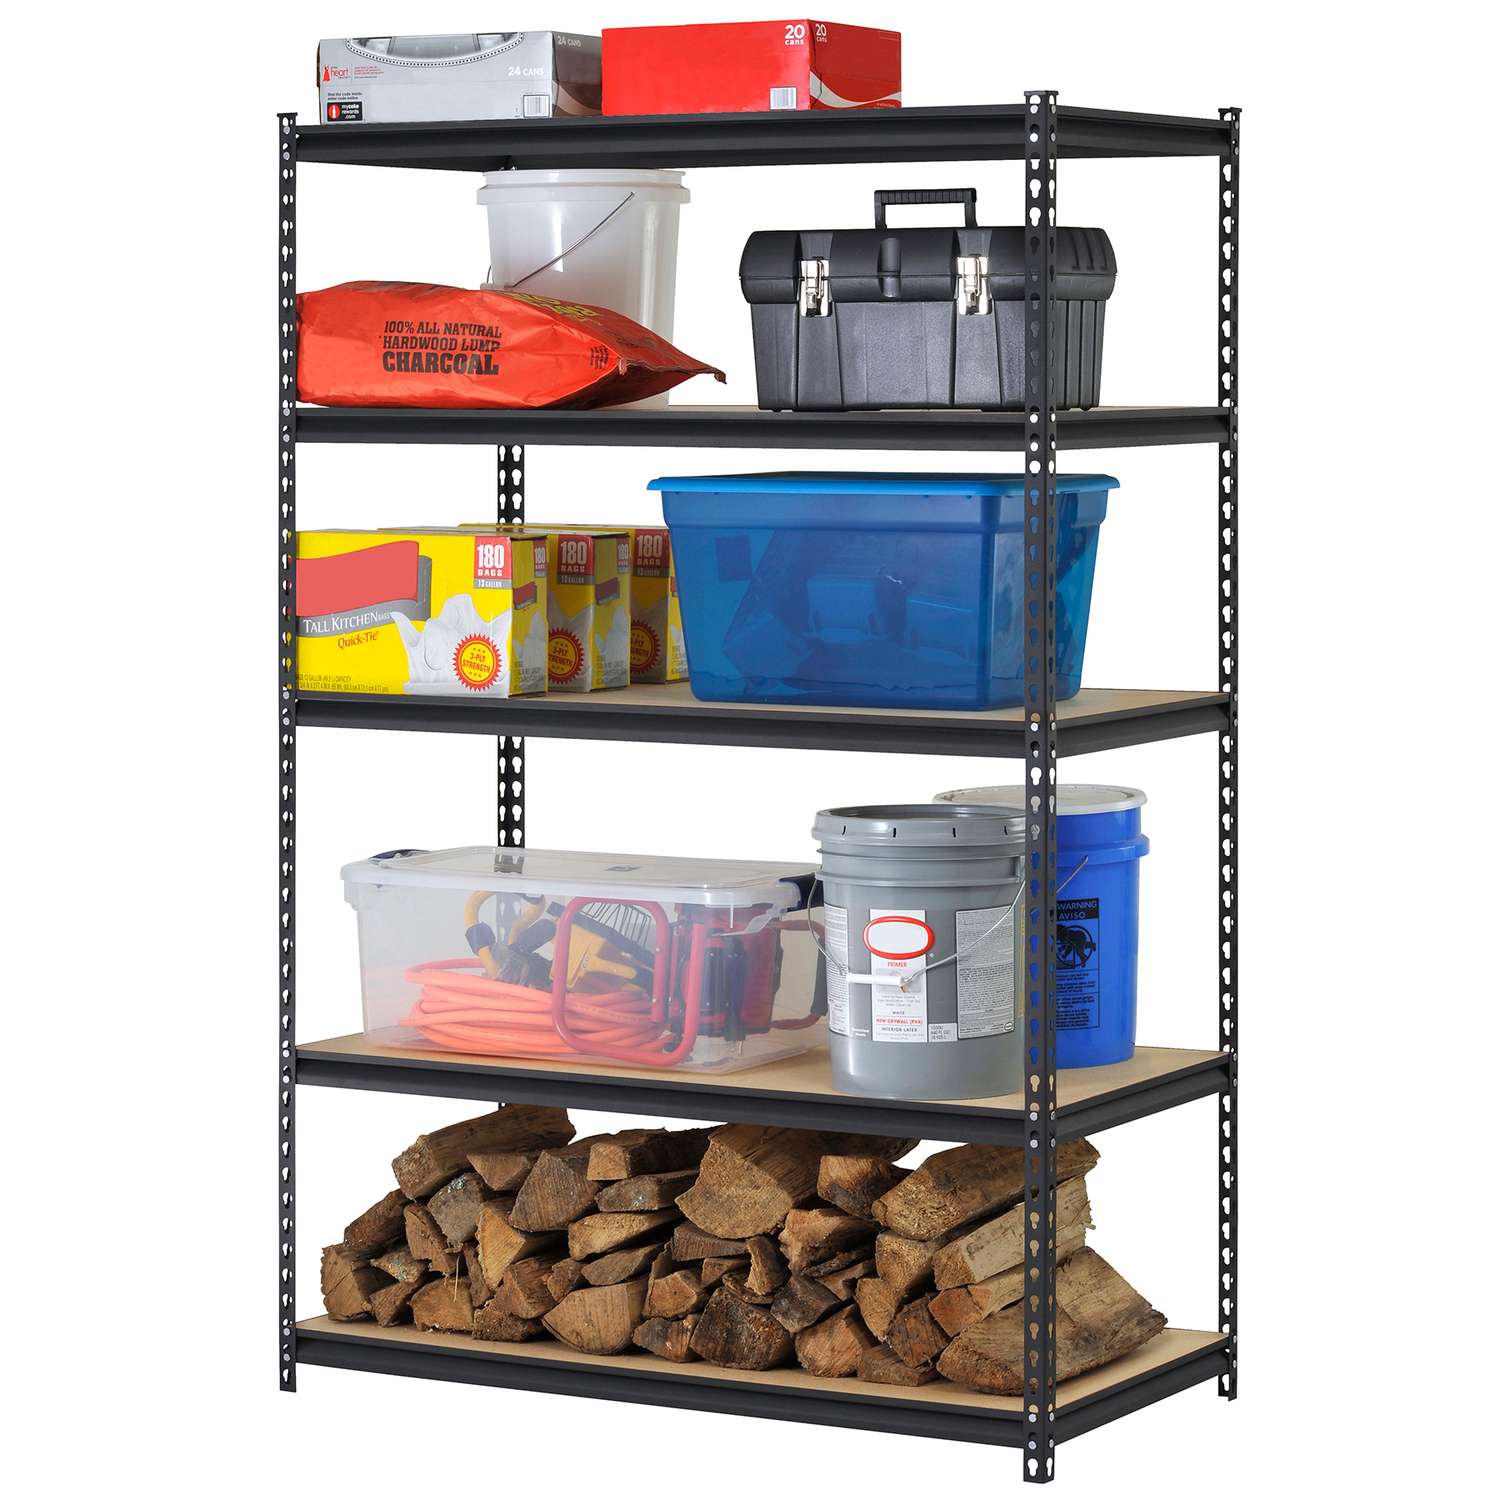 Vertical Artwork Storage Racks - Storage Essentials - Professional storage  solutions that include Mobile Shelving, Picture Racking and Medical Storage